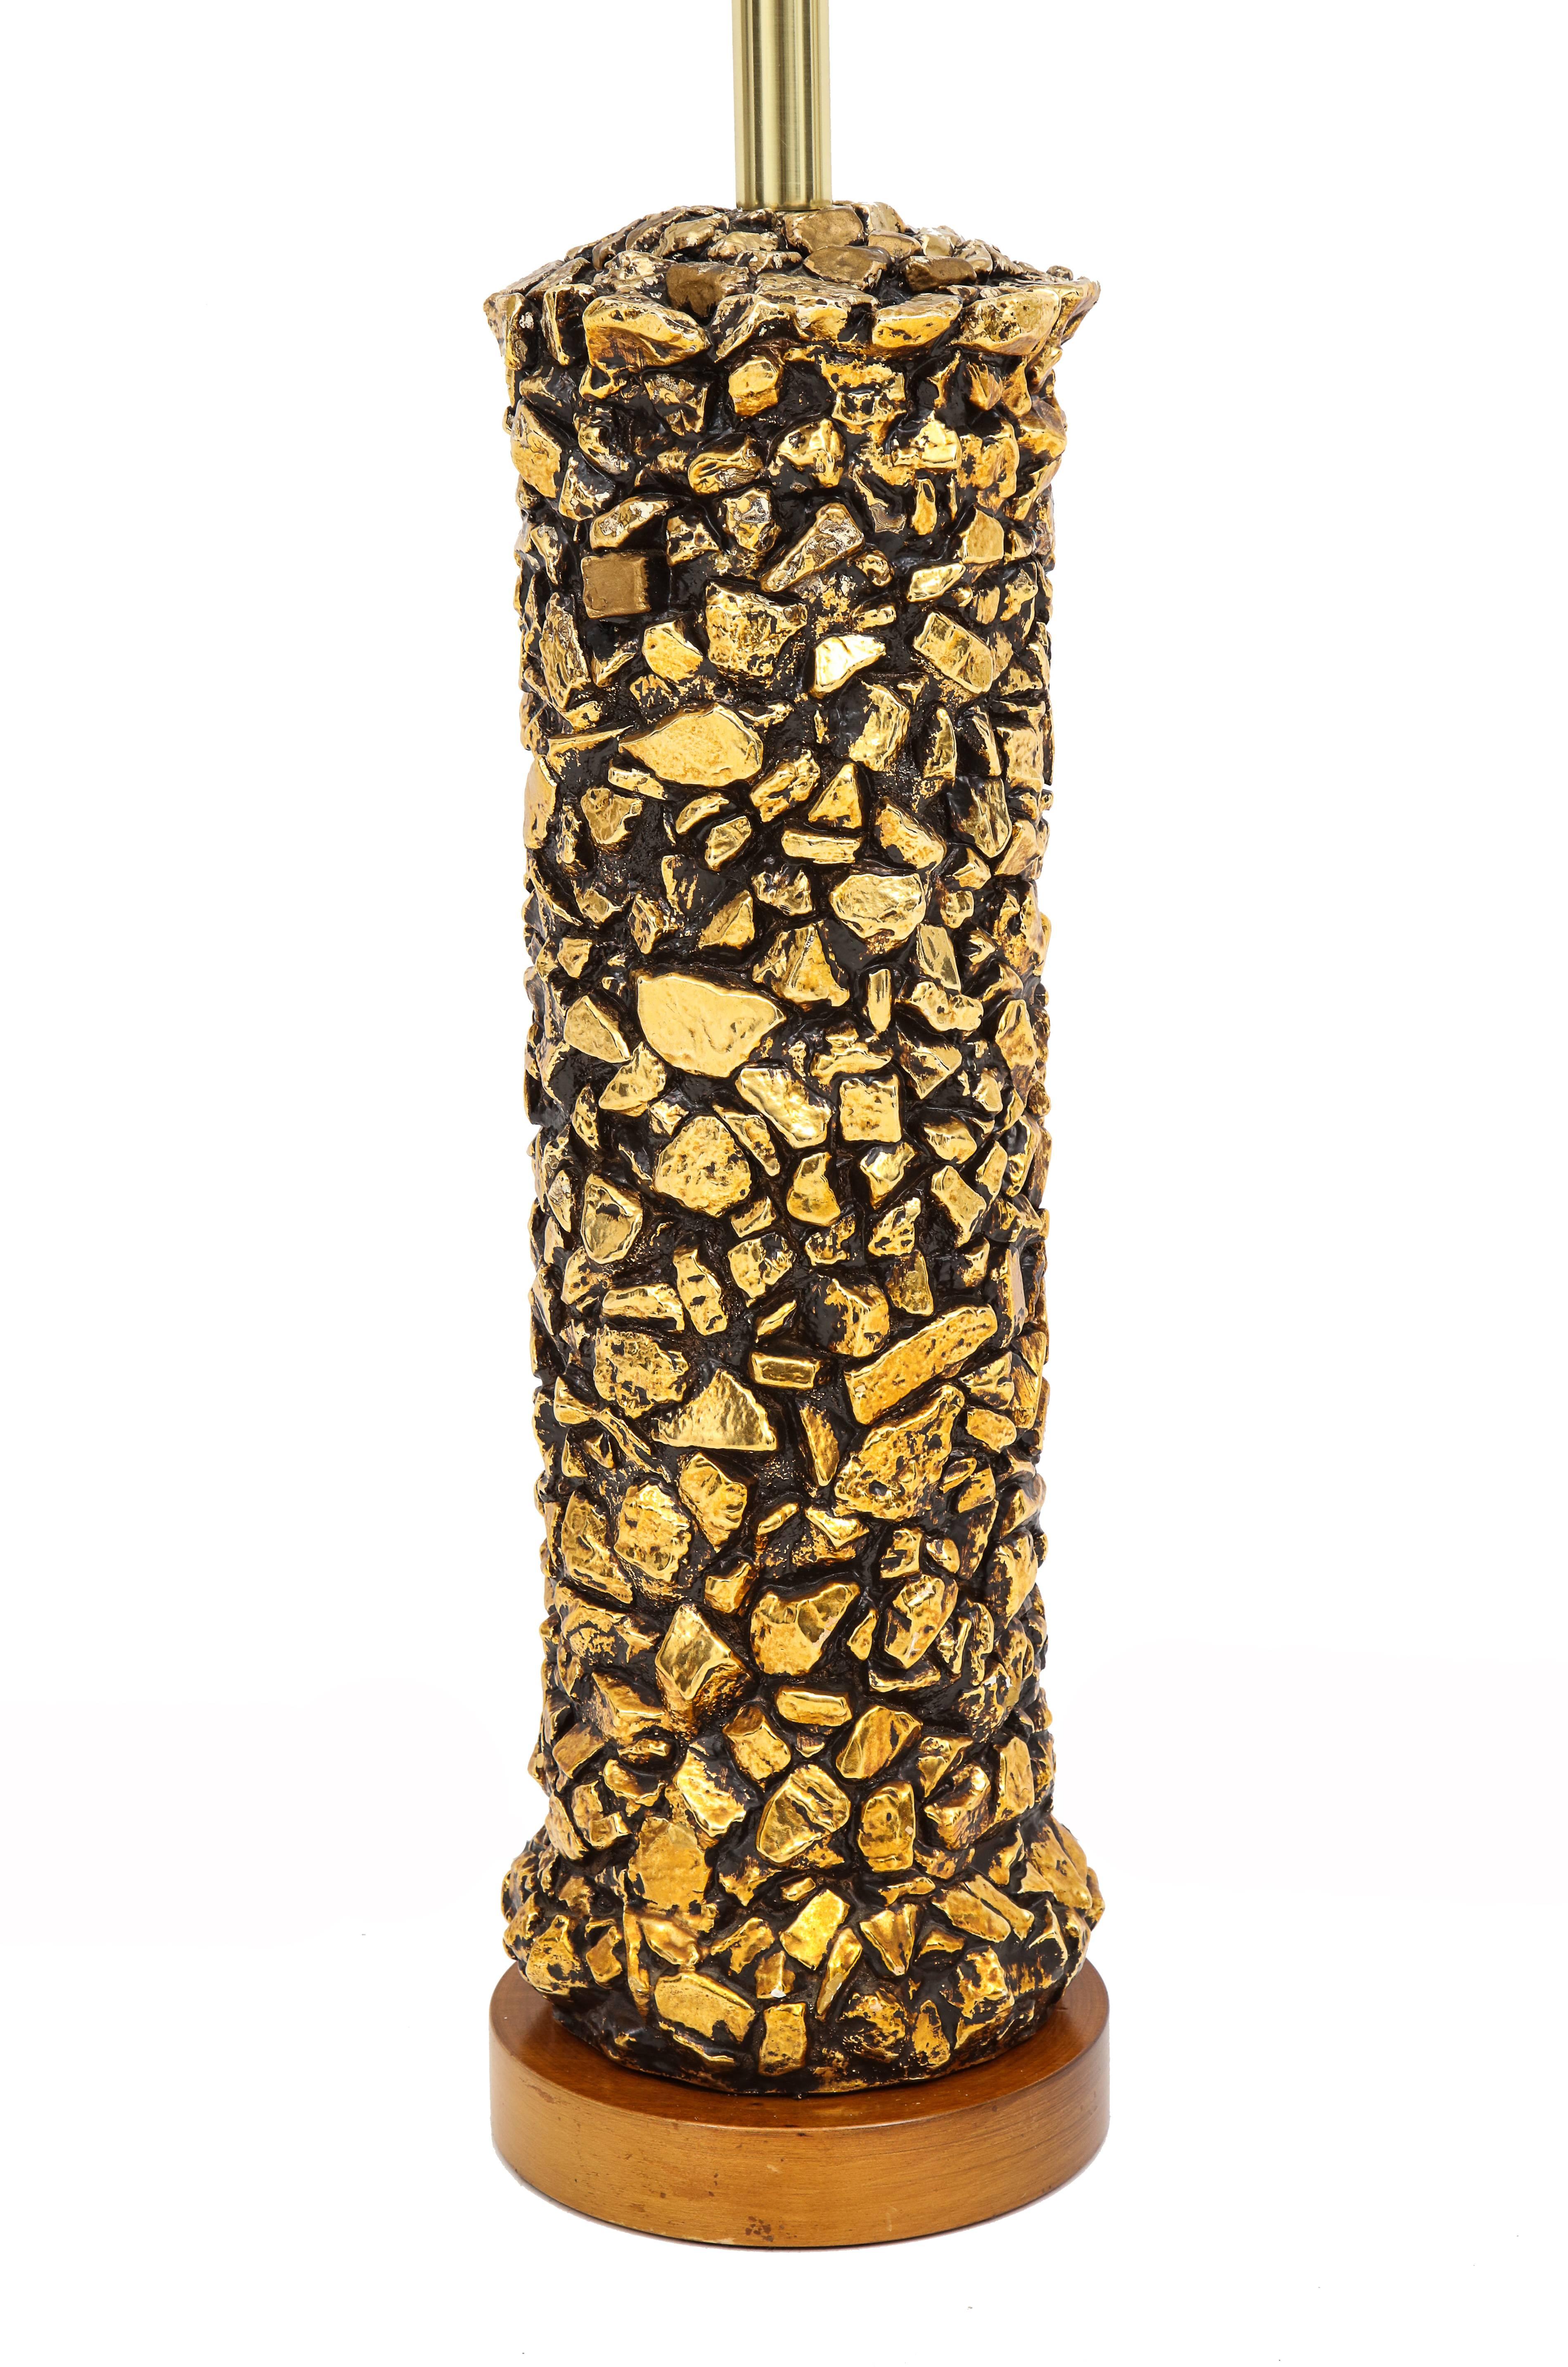 Gold pebble table lamp plaster, USA, 1970s. Tall cylindrical lamp with faux rock surface. Rewired with silk cord and new quality brass two light cluster. 24-karat gold leaf paint over plaster.